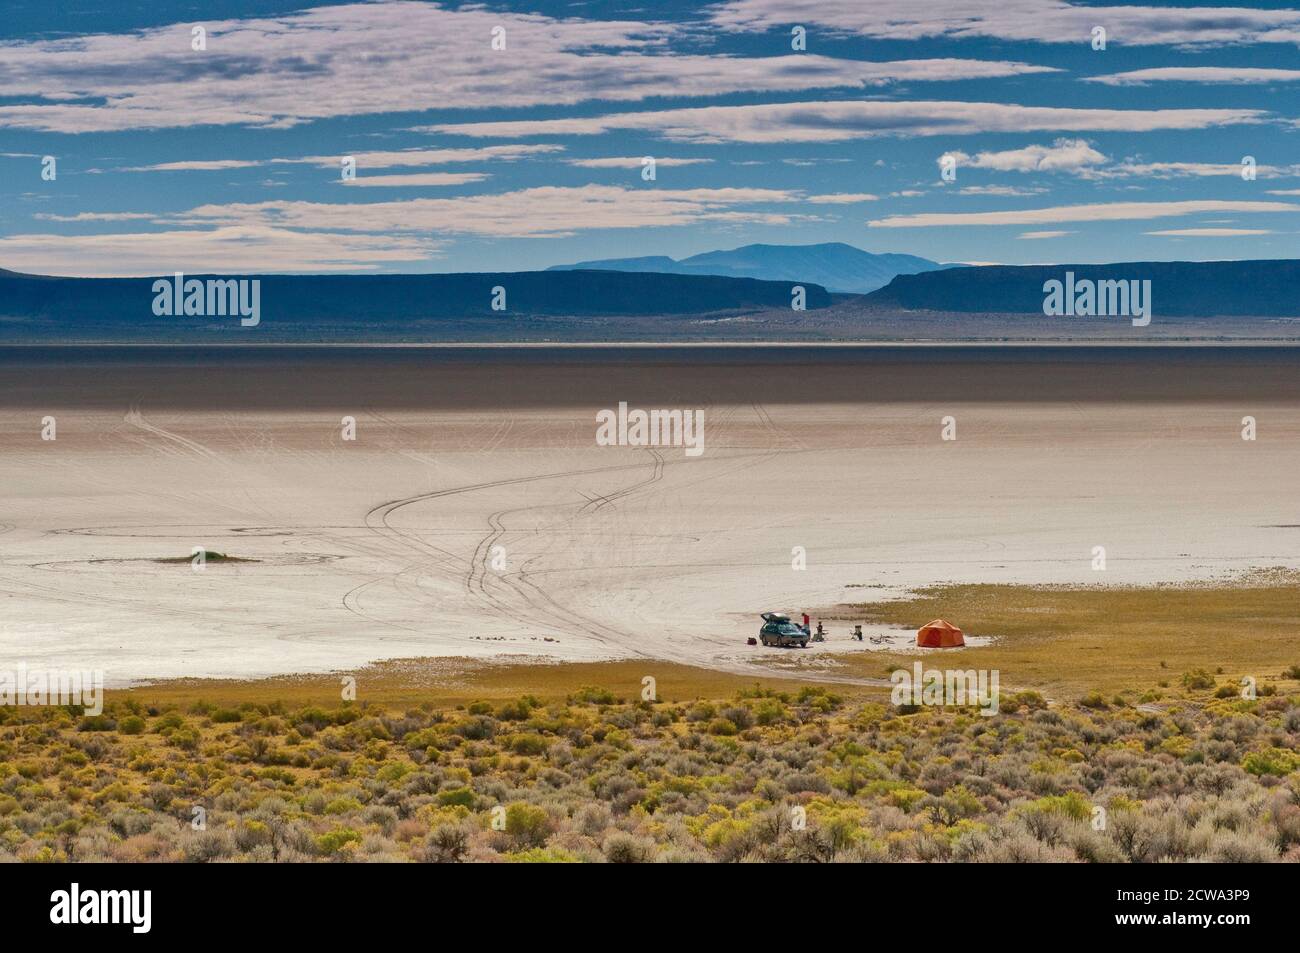 Campers on edge of dry Alvord Lake at Alvord Desert seen from East Steens Road near Steens Mountain, Great Basin Desert region, Oregon, USA Stock Photo